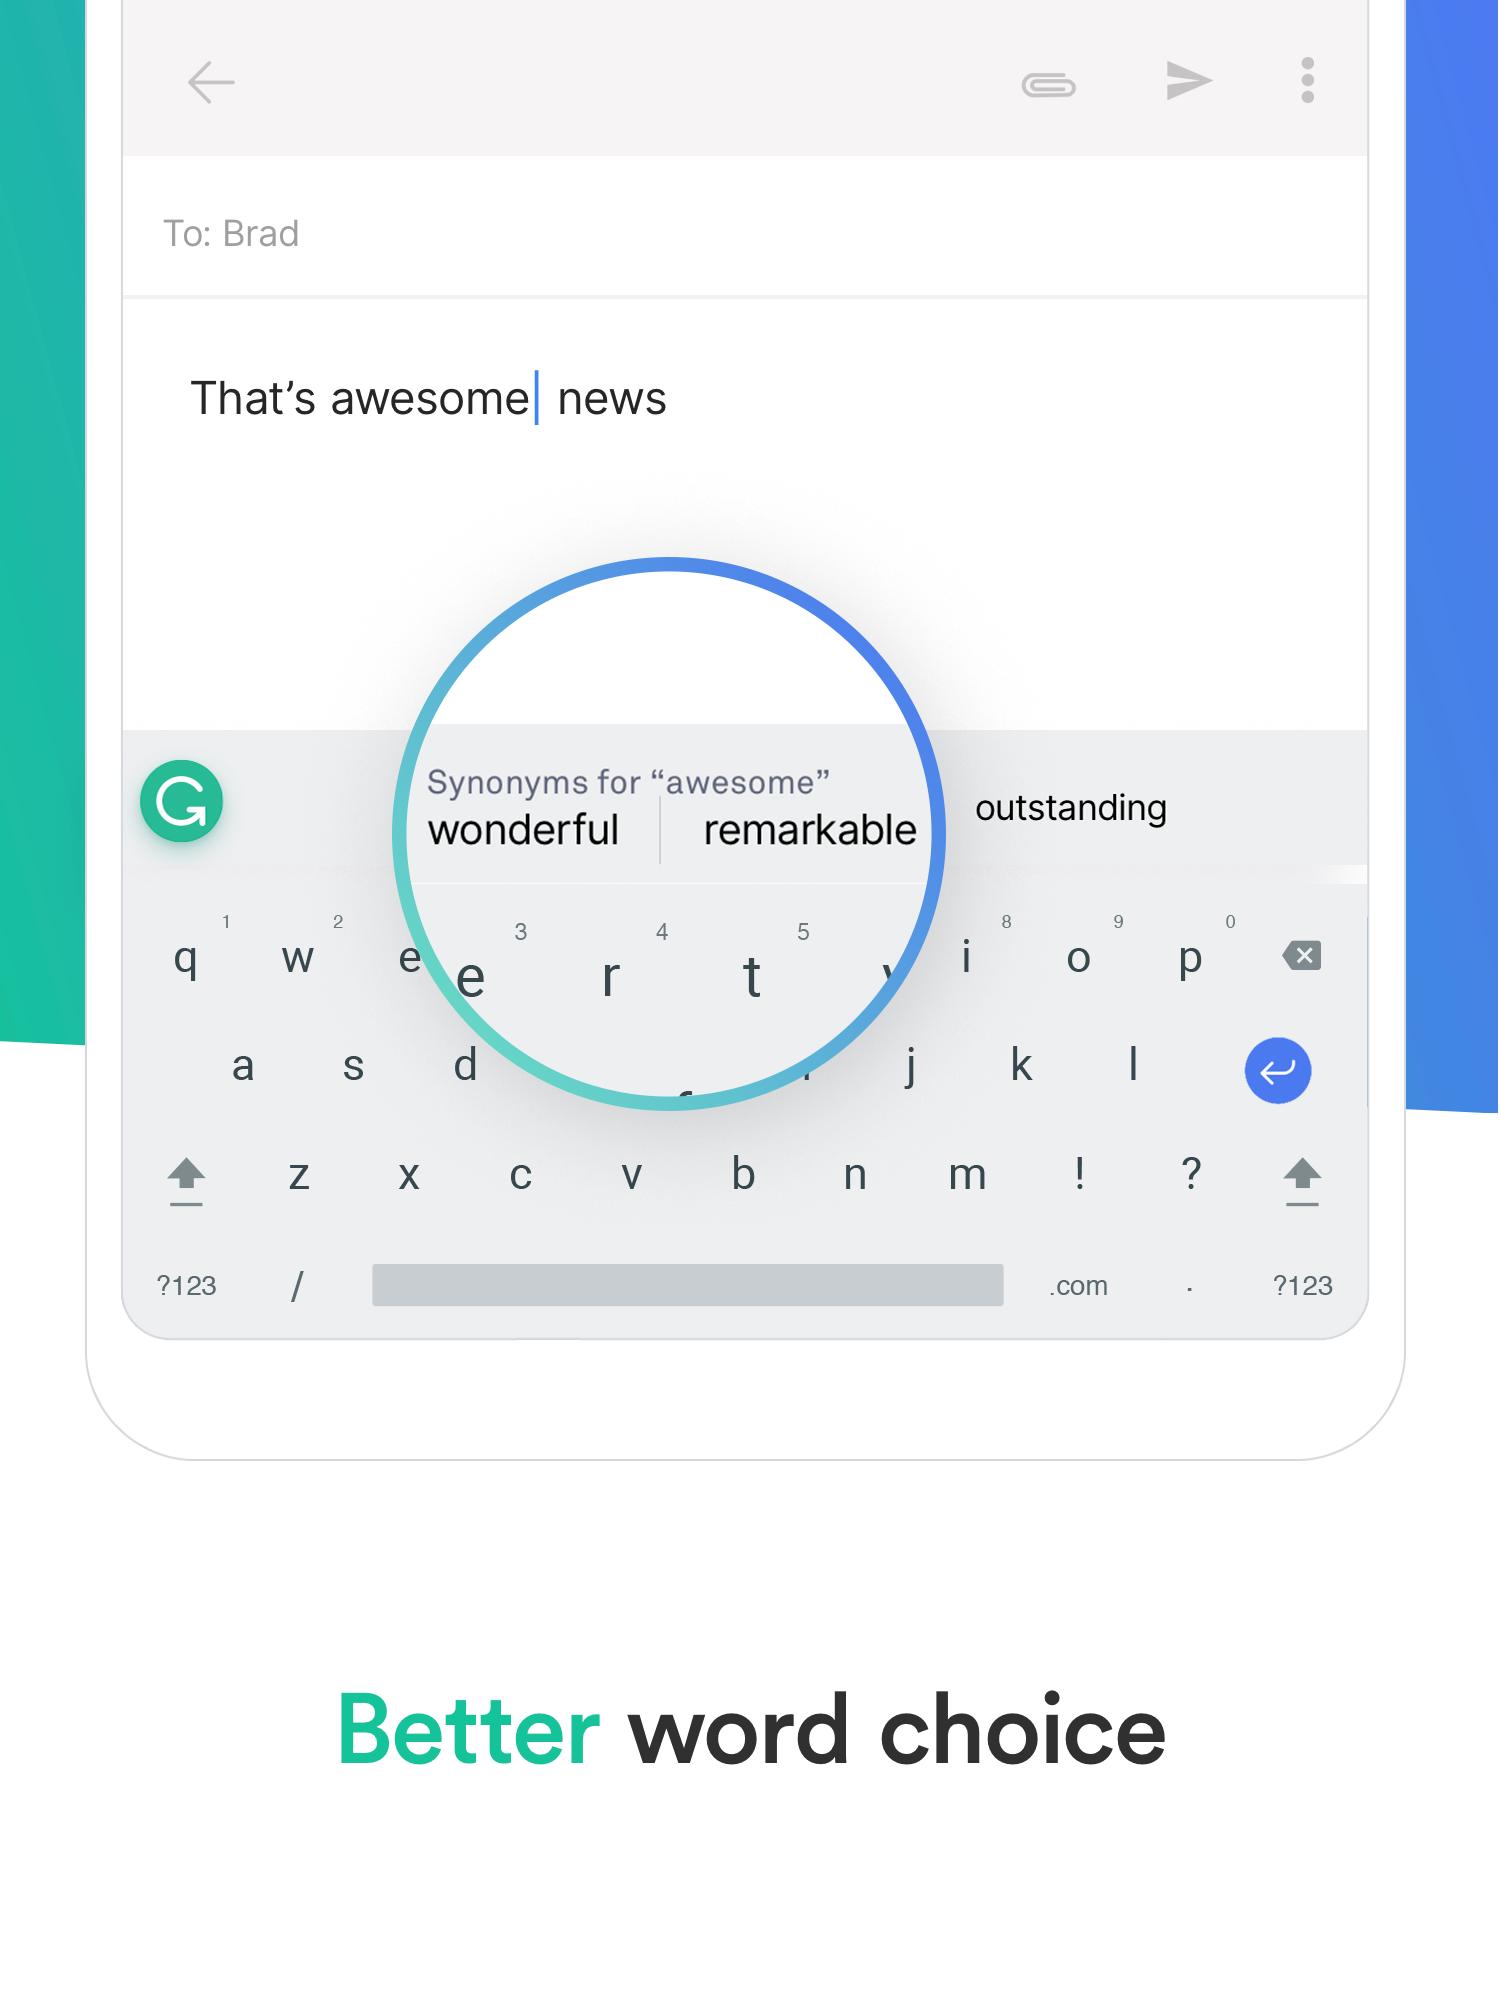 Grammarly Keyboard — Type with confidence 1.4.0.7 Screenshot 10